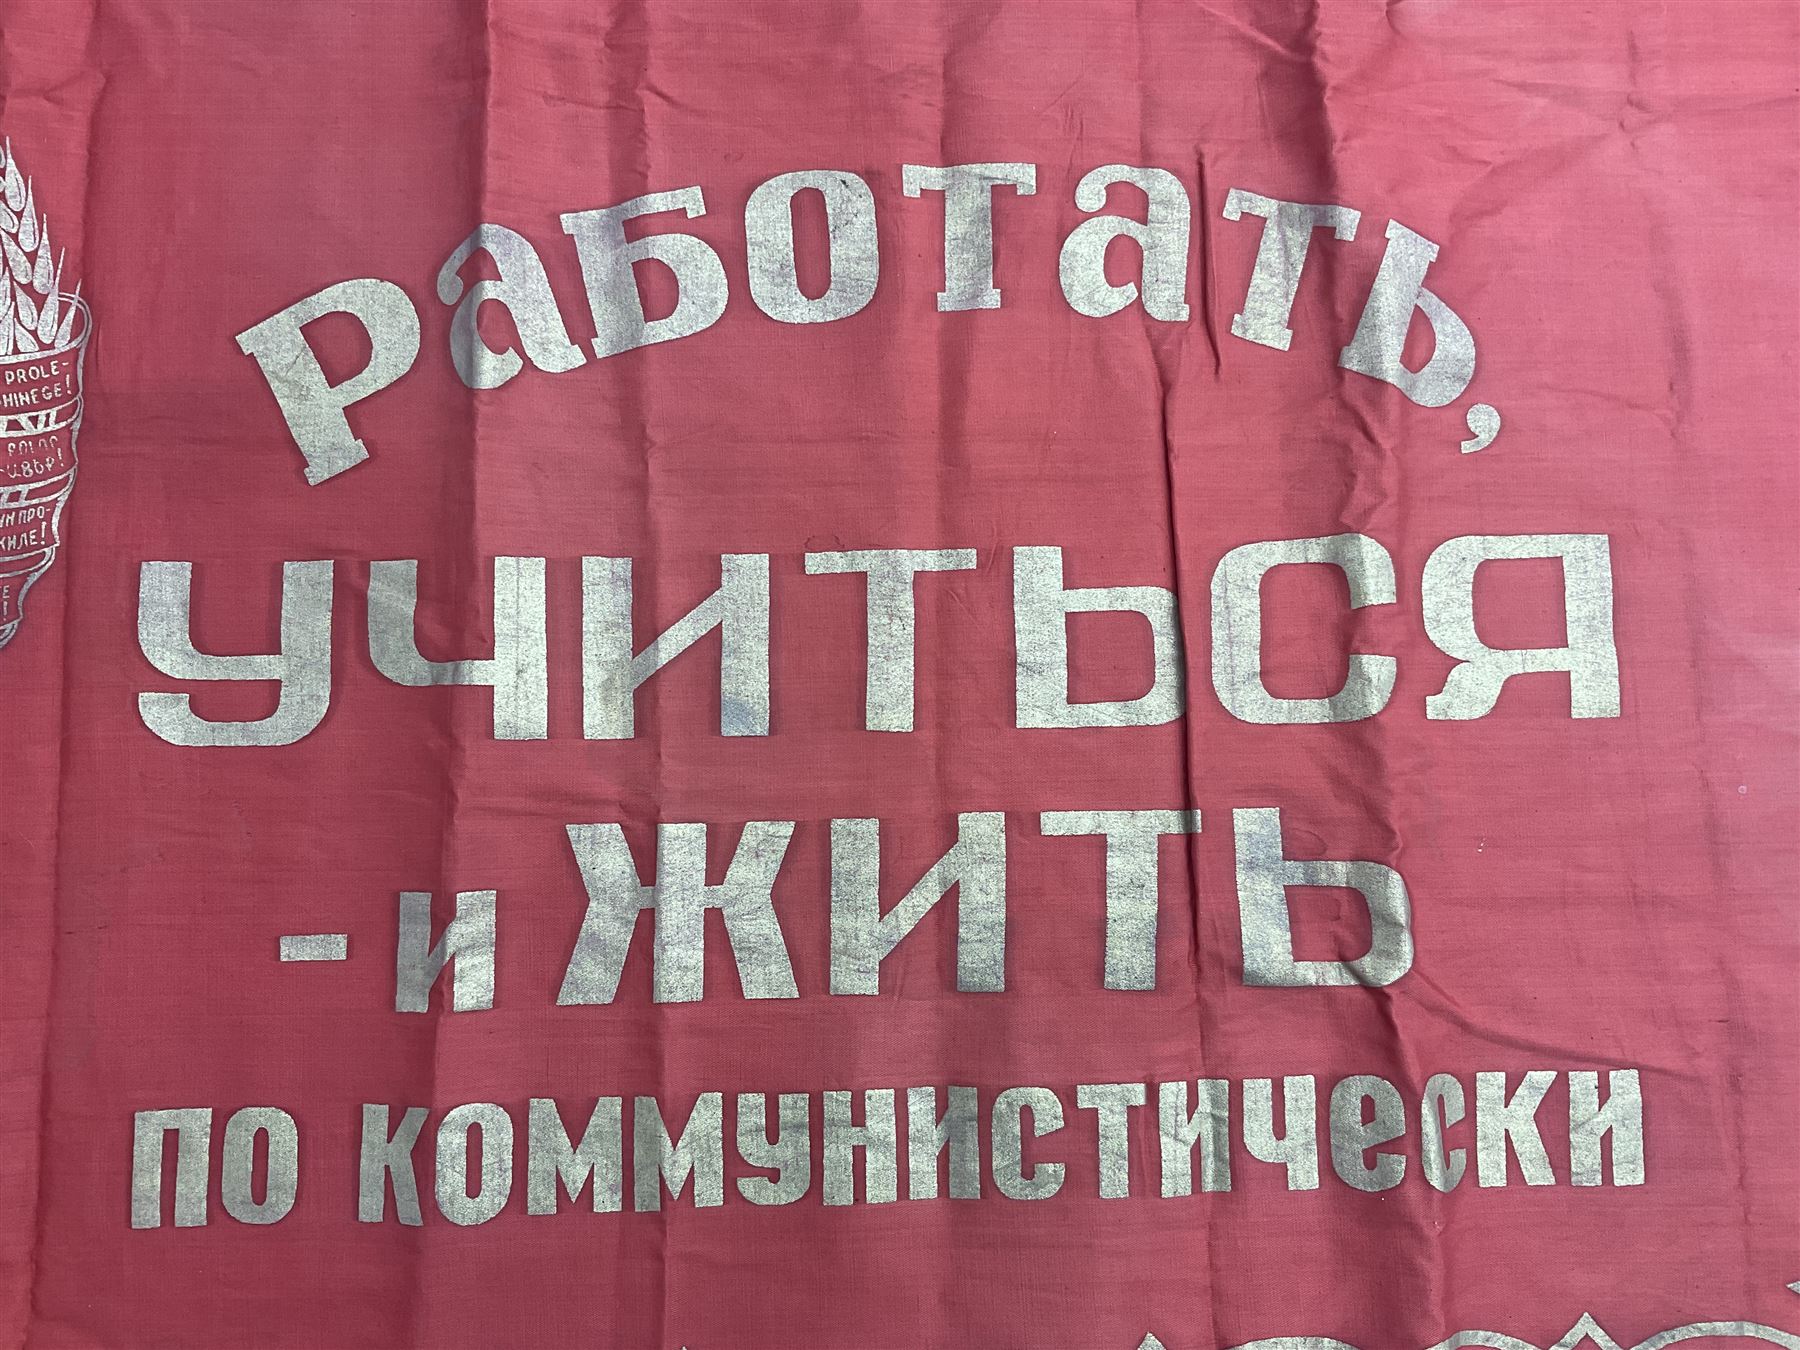 1970s Soviet banner printed in gold on a red ground - Image 5 of 38